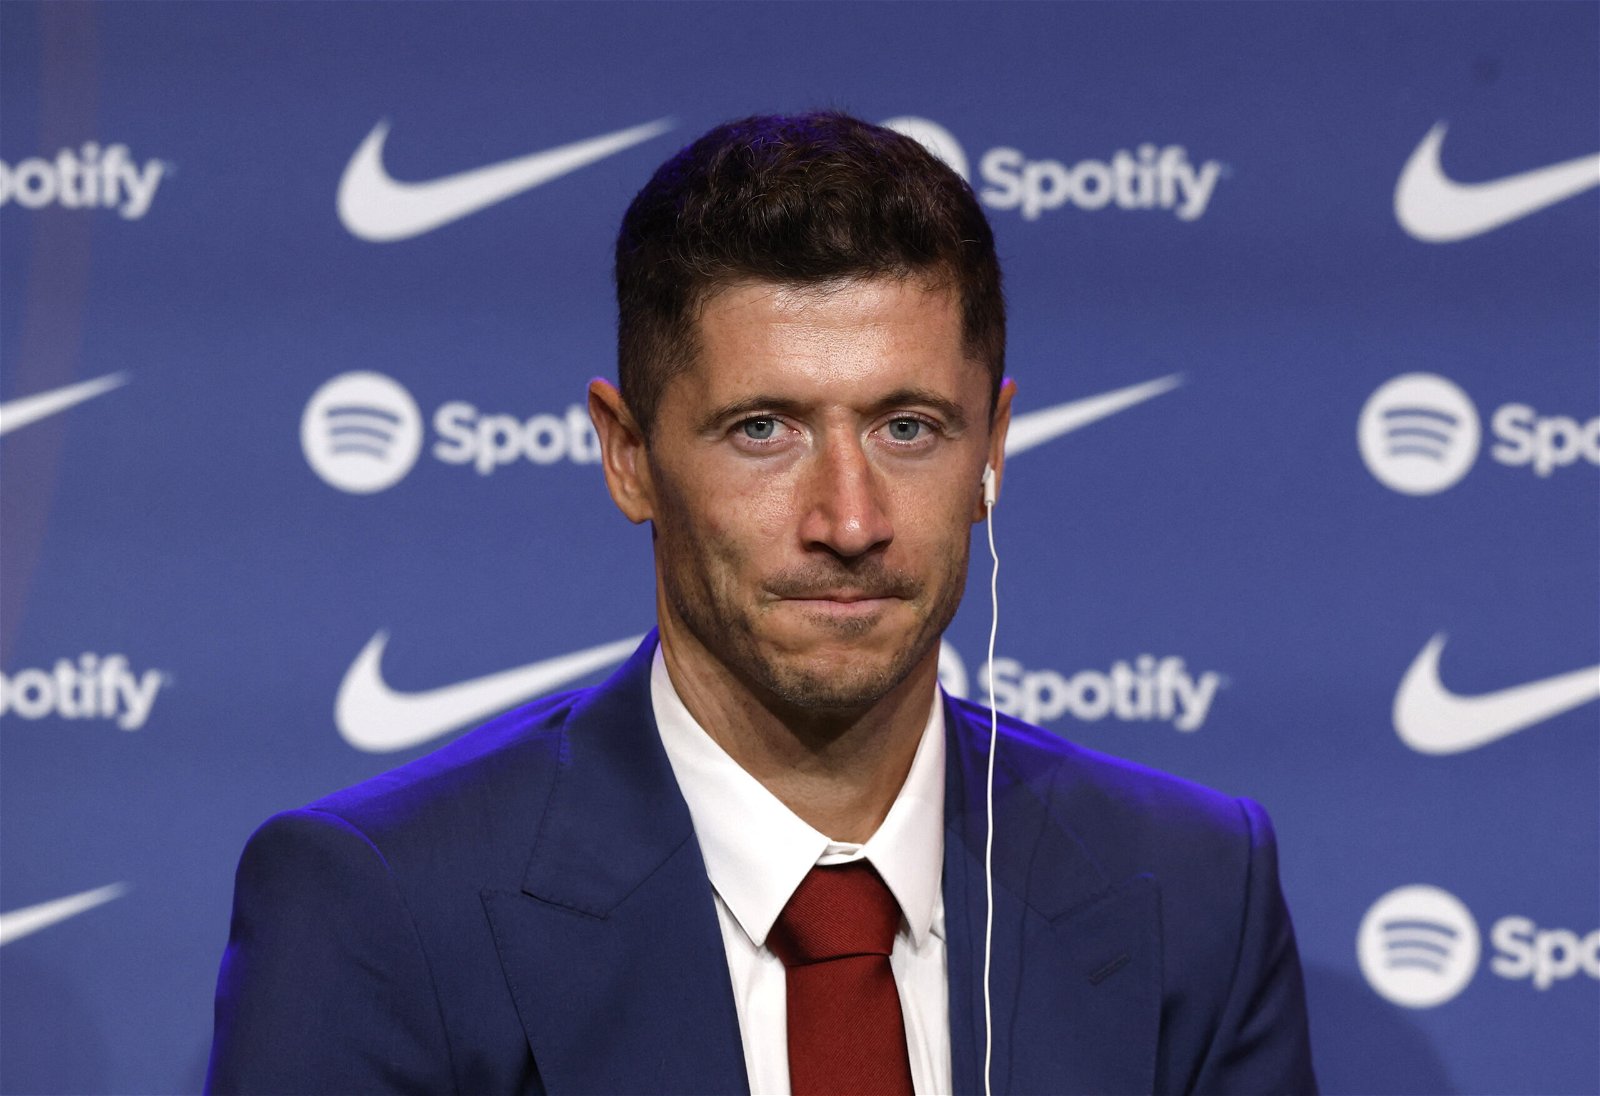 Robert Lewandowski admits he does not want to face Bayern in UCL